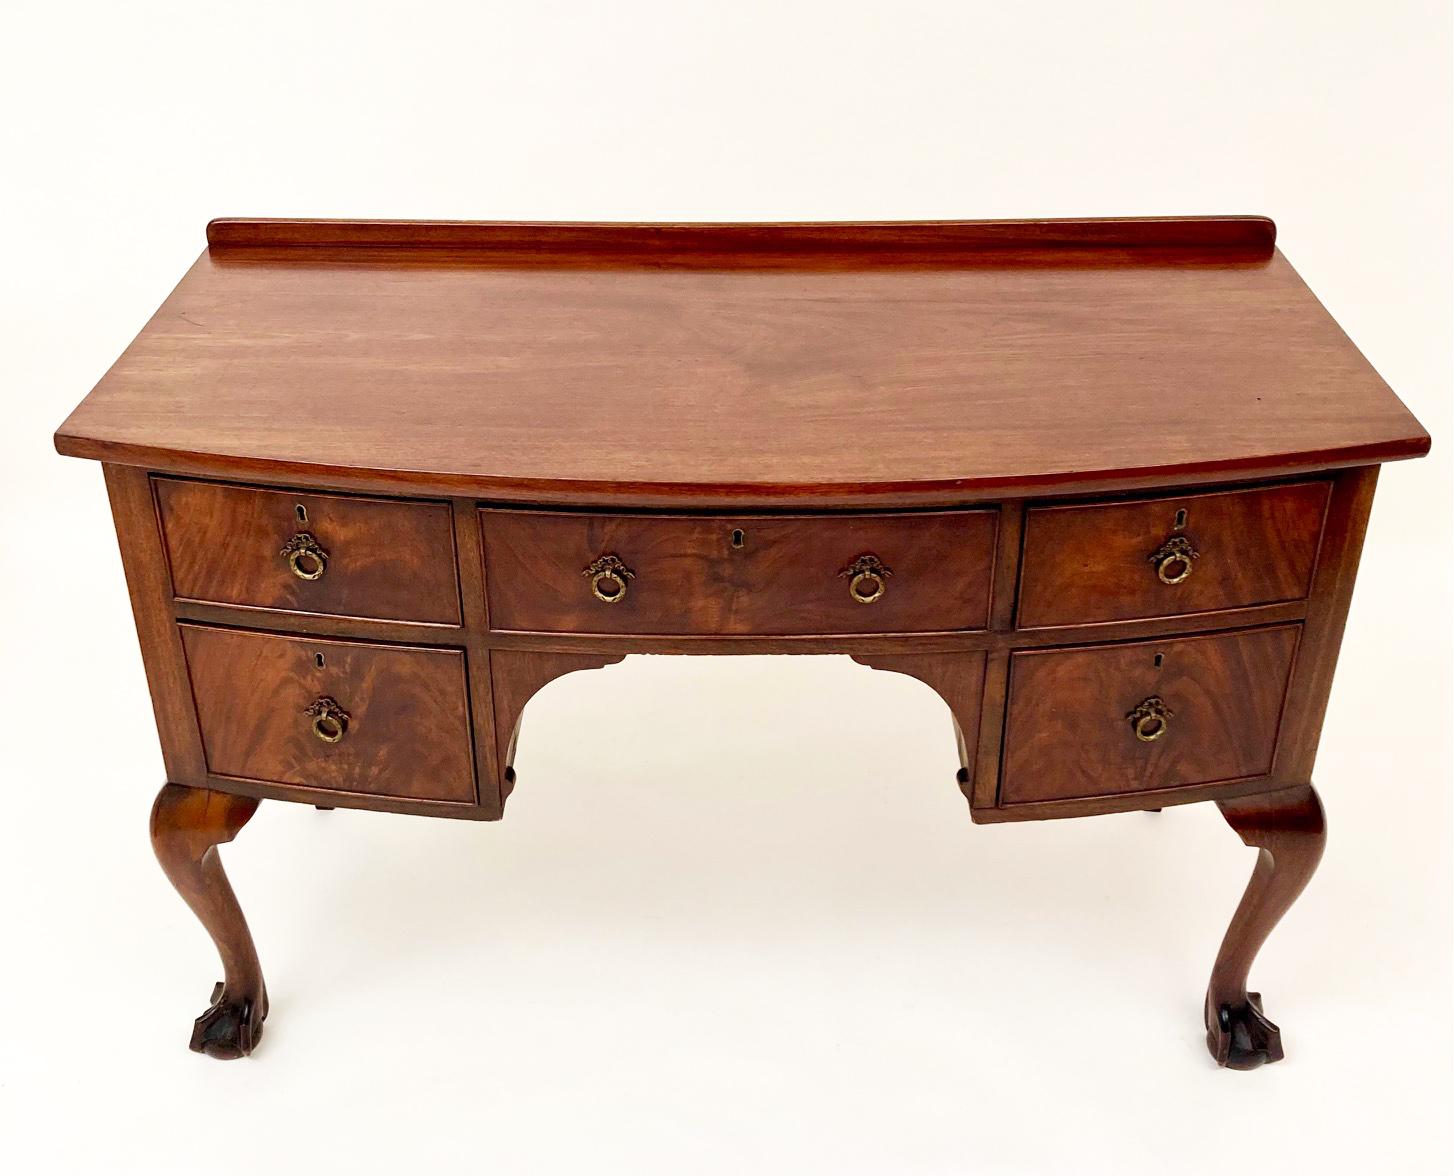 This beautiful English Chippendale small sideboard originated in the 19th century. Made of mahogany and beautifully figured mahogany inlay on the drawer fronts, the front two legs are Chippendale cabriole with heavy ball and claw feet. The drawers